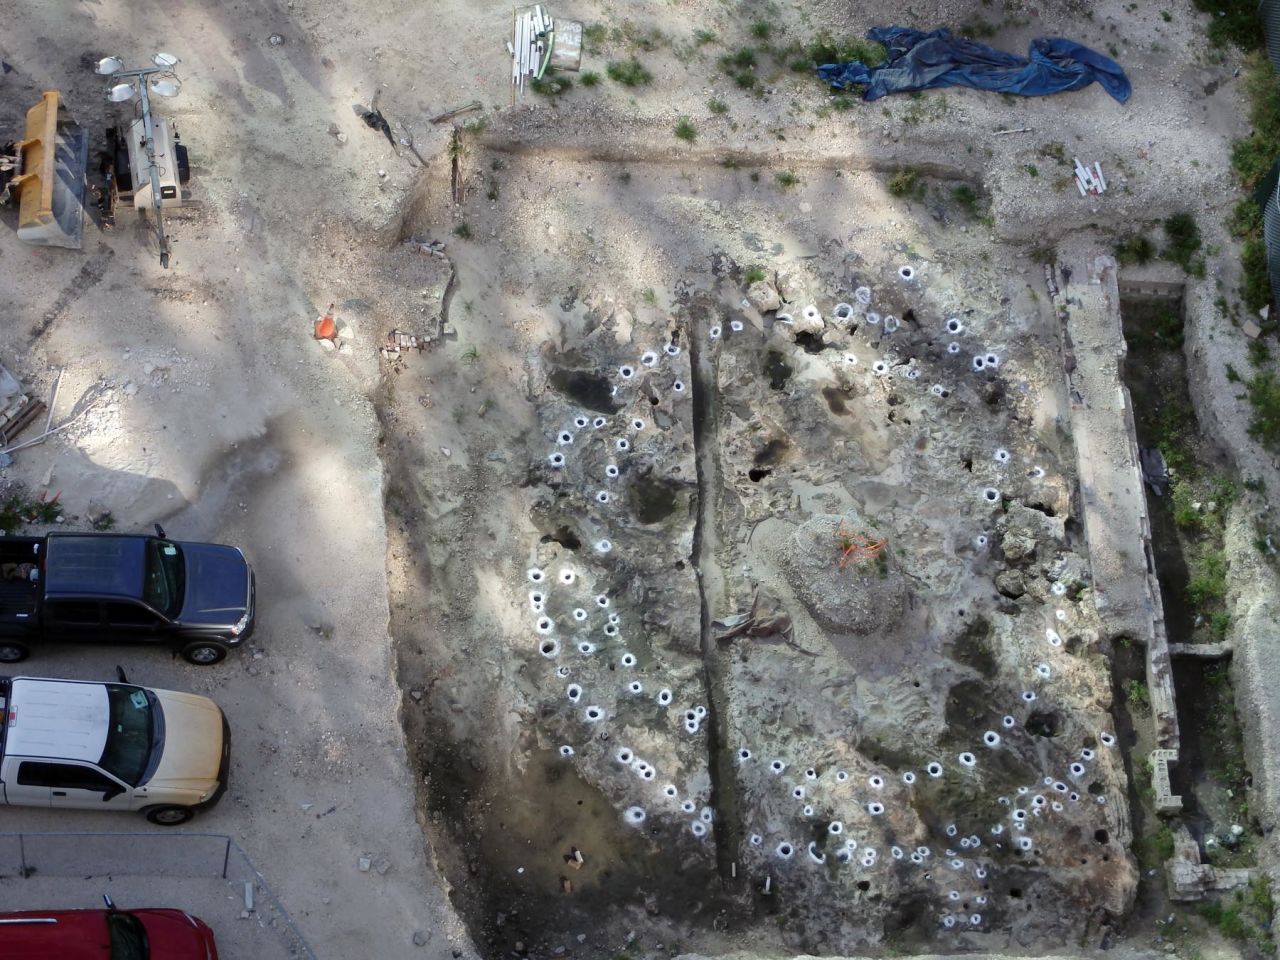 A network of holes lay out the foundations of a Tequesta settlement. The ancient tribe lived in what is now metro Miami until the 1700s, and the holes held pine posts that framed their thatched buildings.